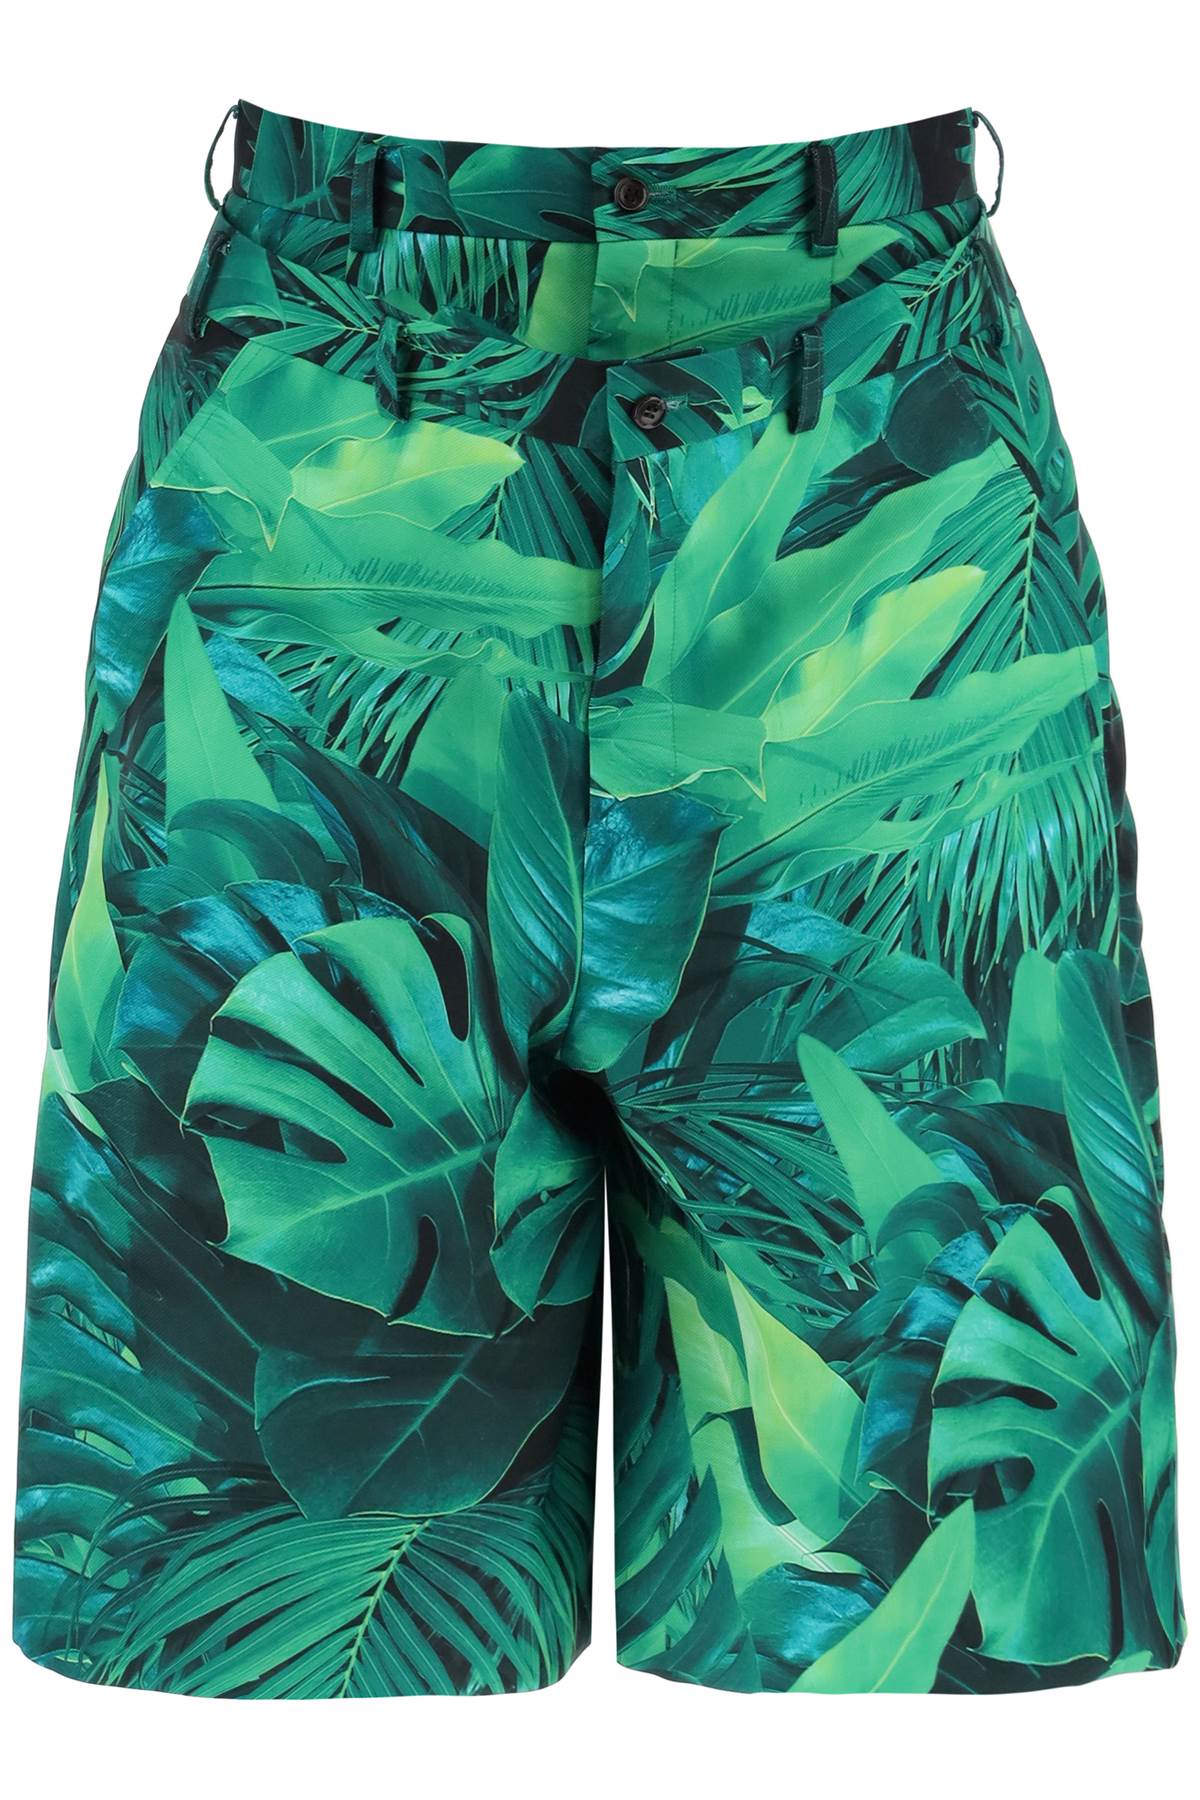 "Jungle Bermuda With Double Front Layer